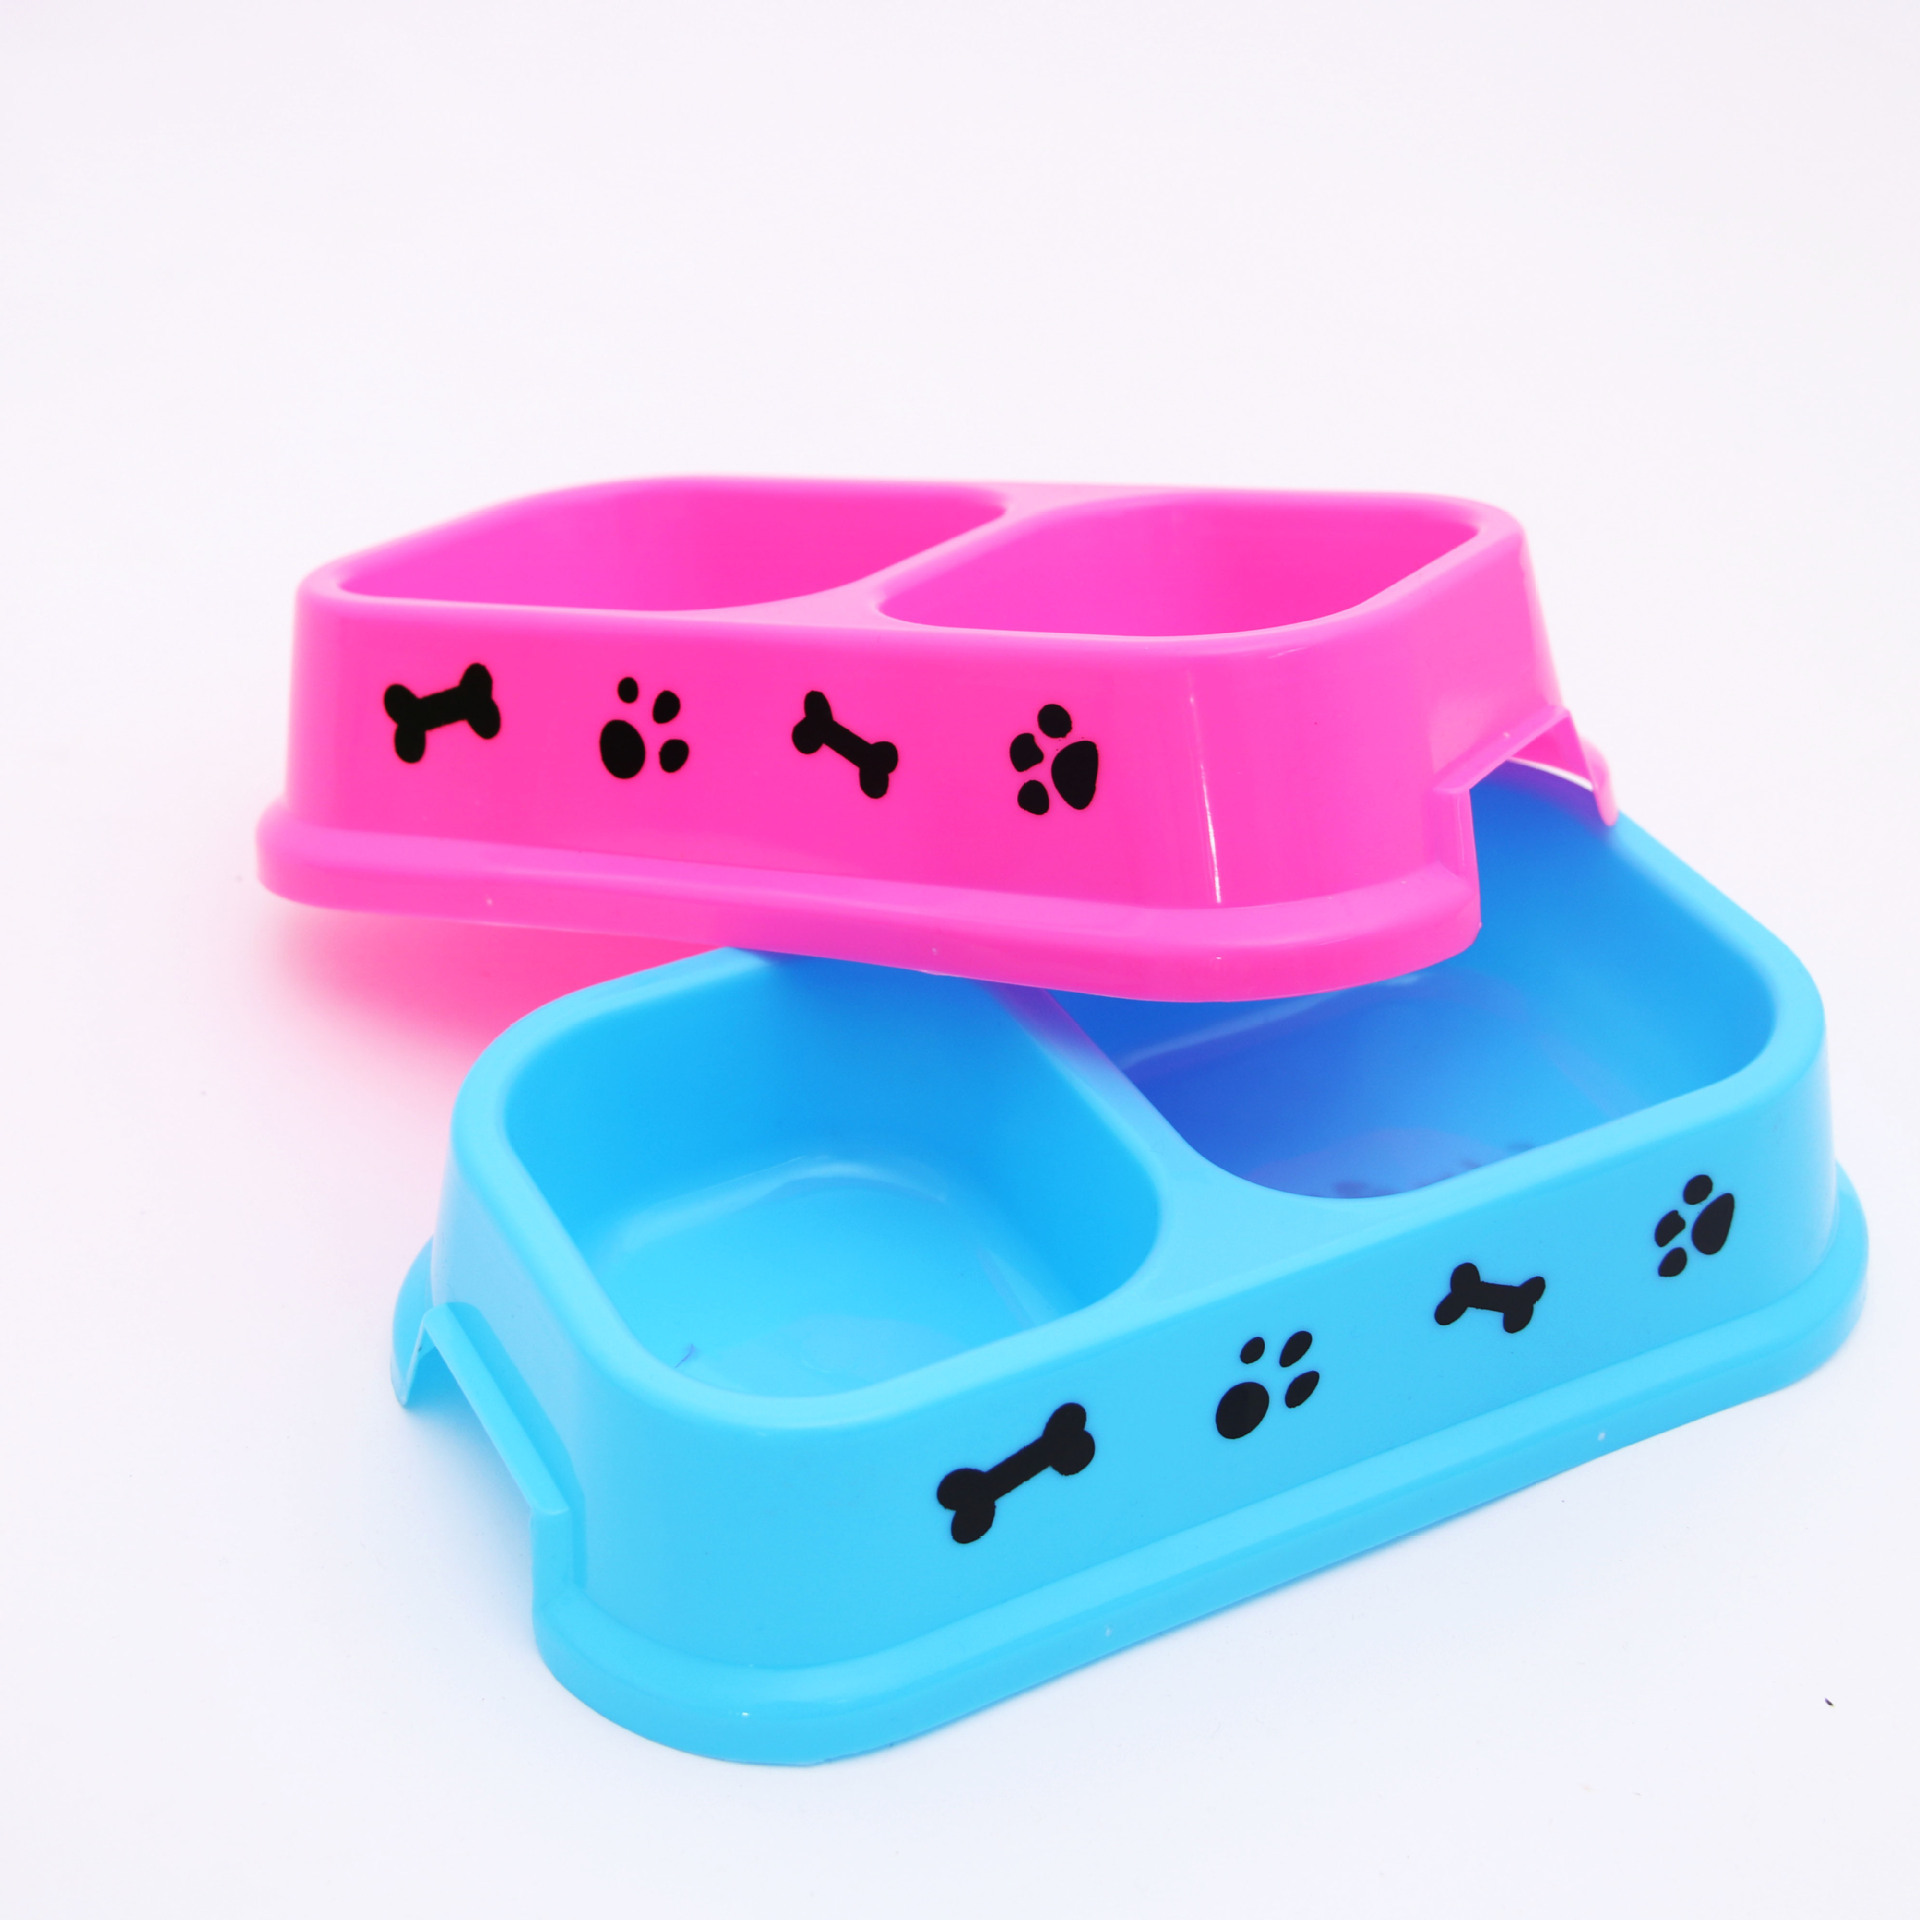 Pet dog printing Double dog pp texture of material candy printing Double bowls Drinking bowl Dog Food Bowl Supplies source Manufactor